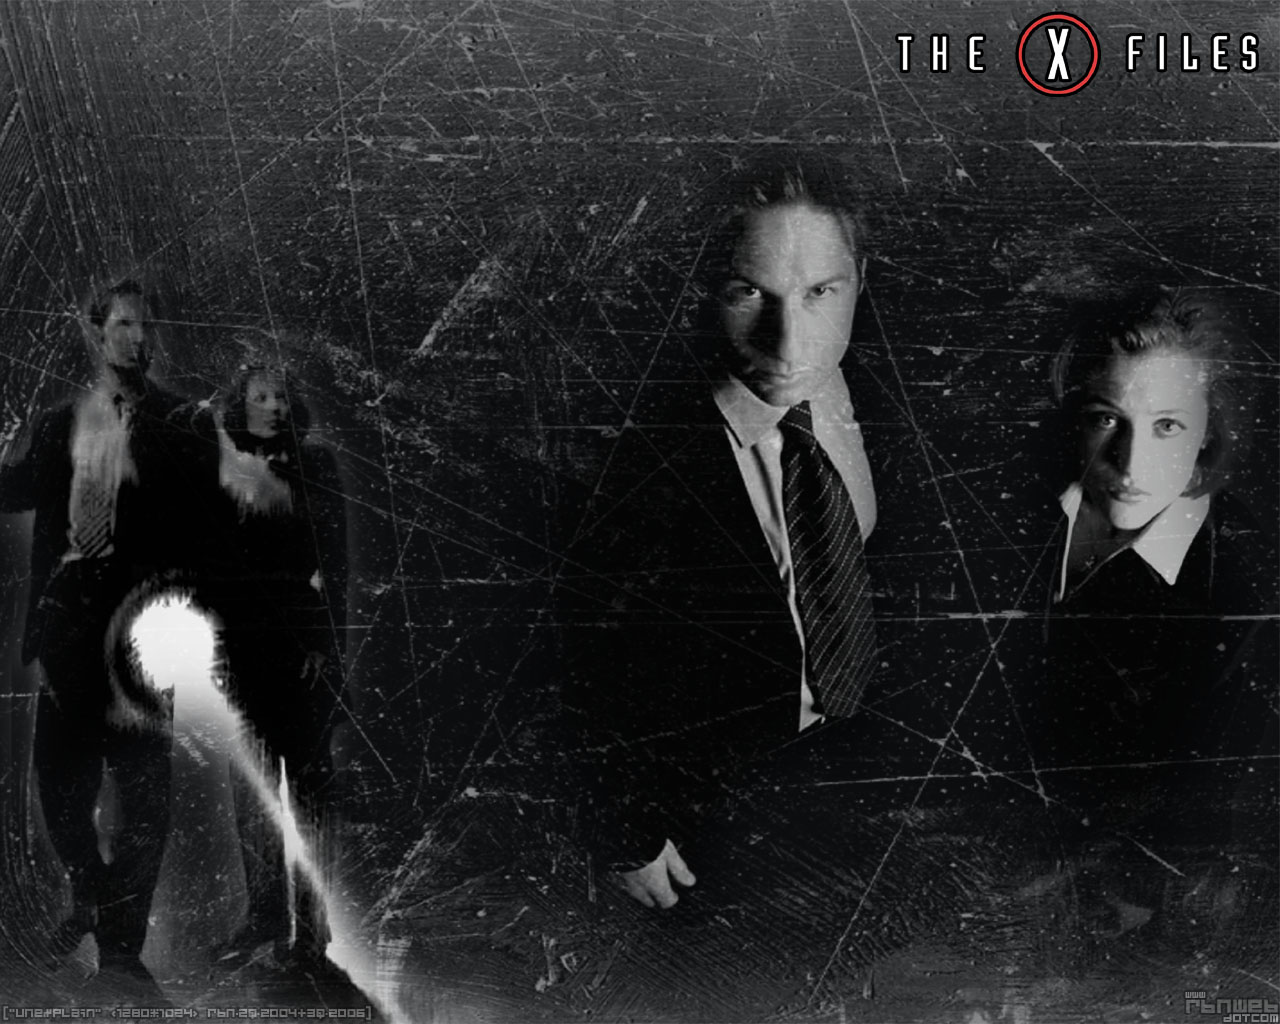 Download full size X Files wallpaper / Movies / 1280x1024